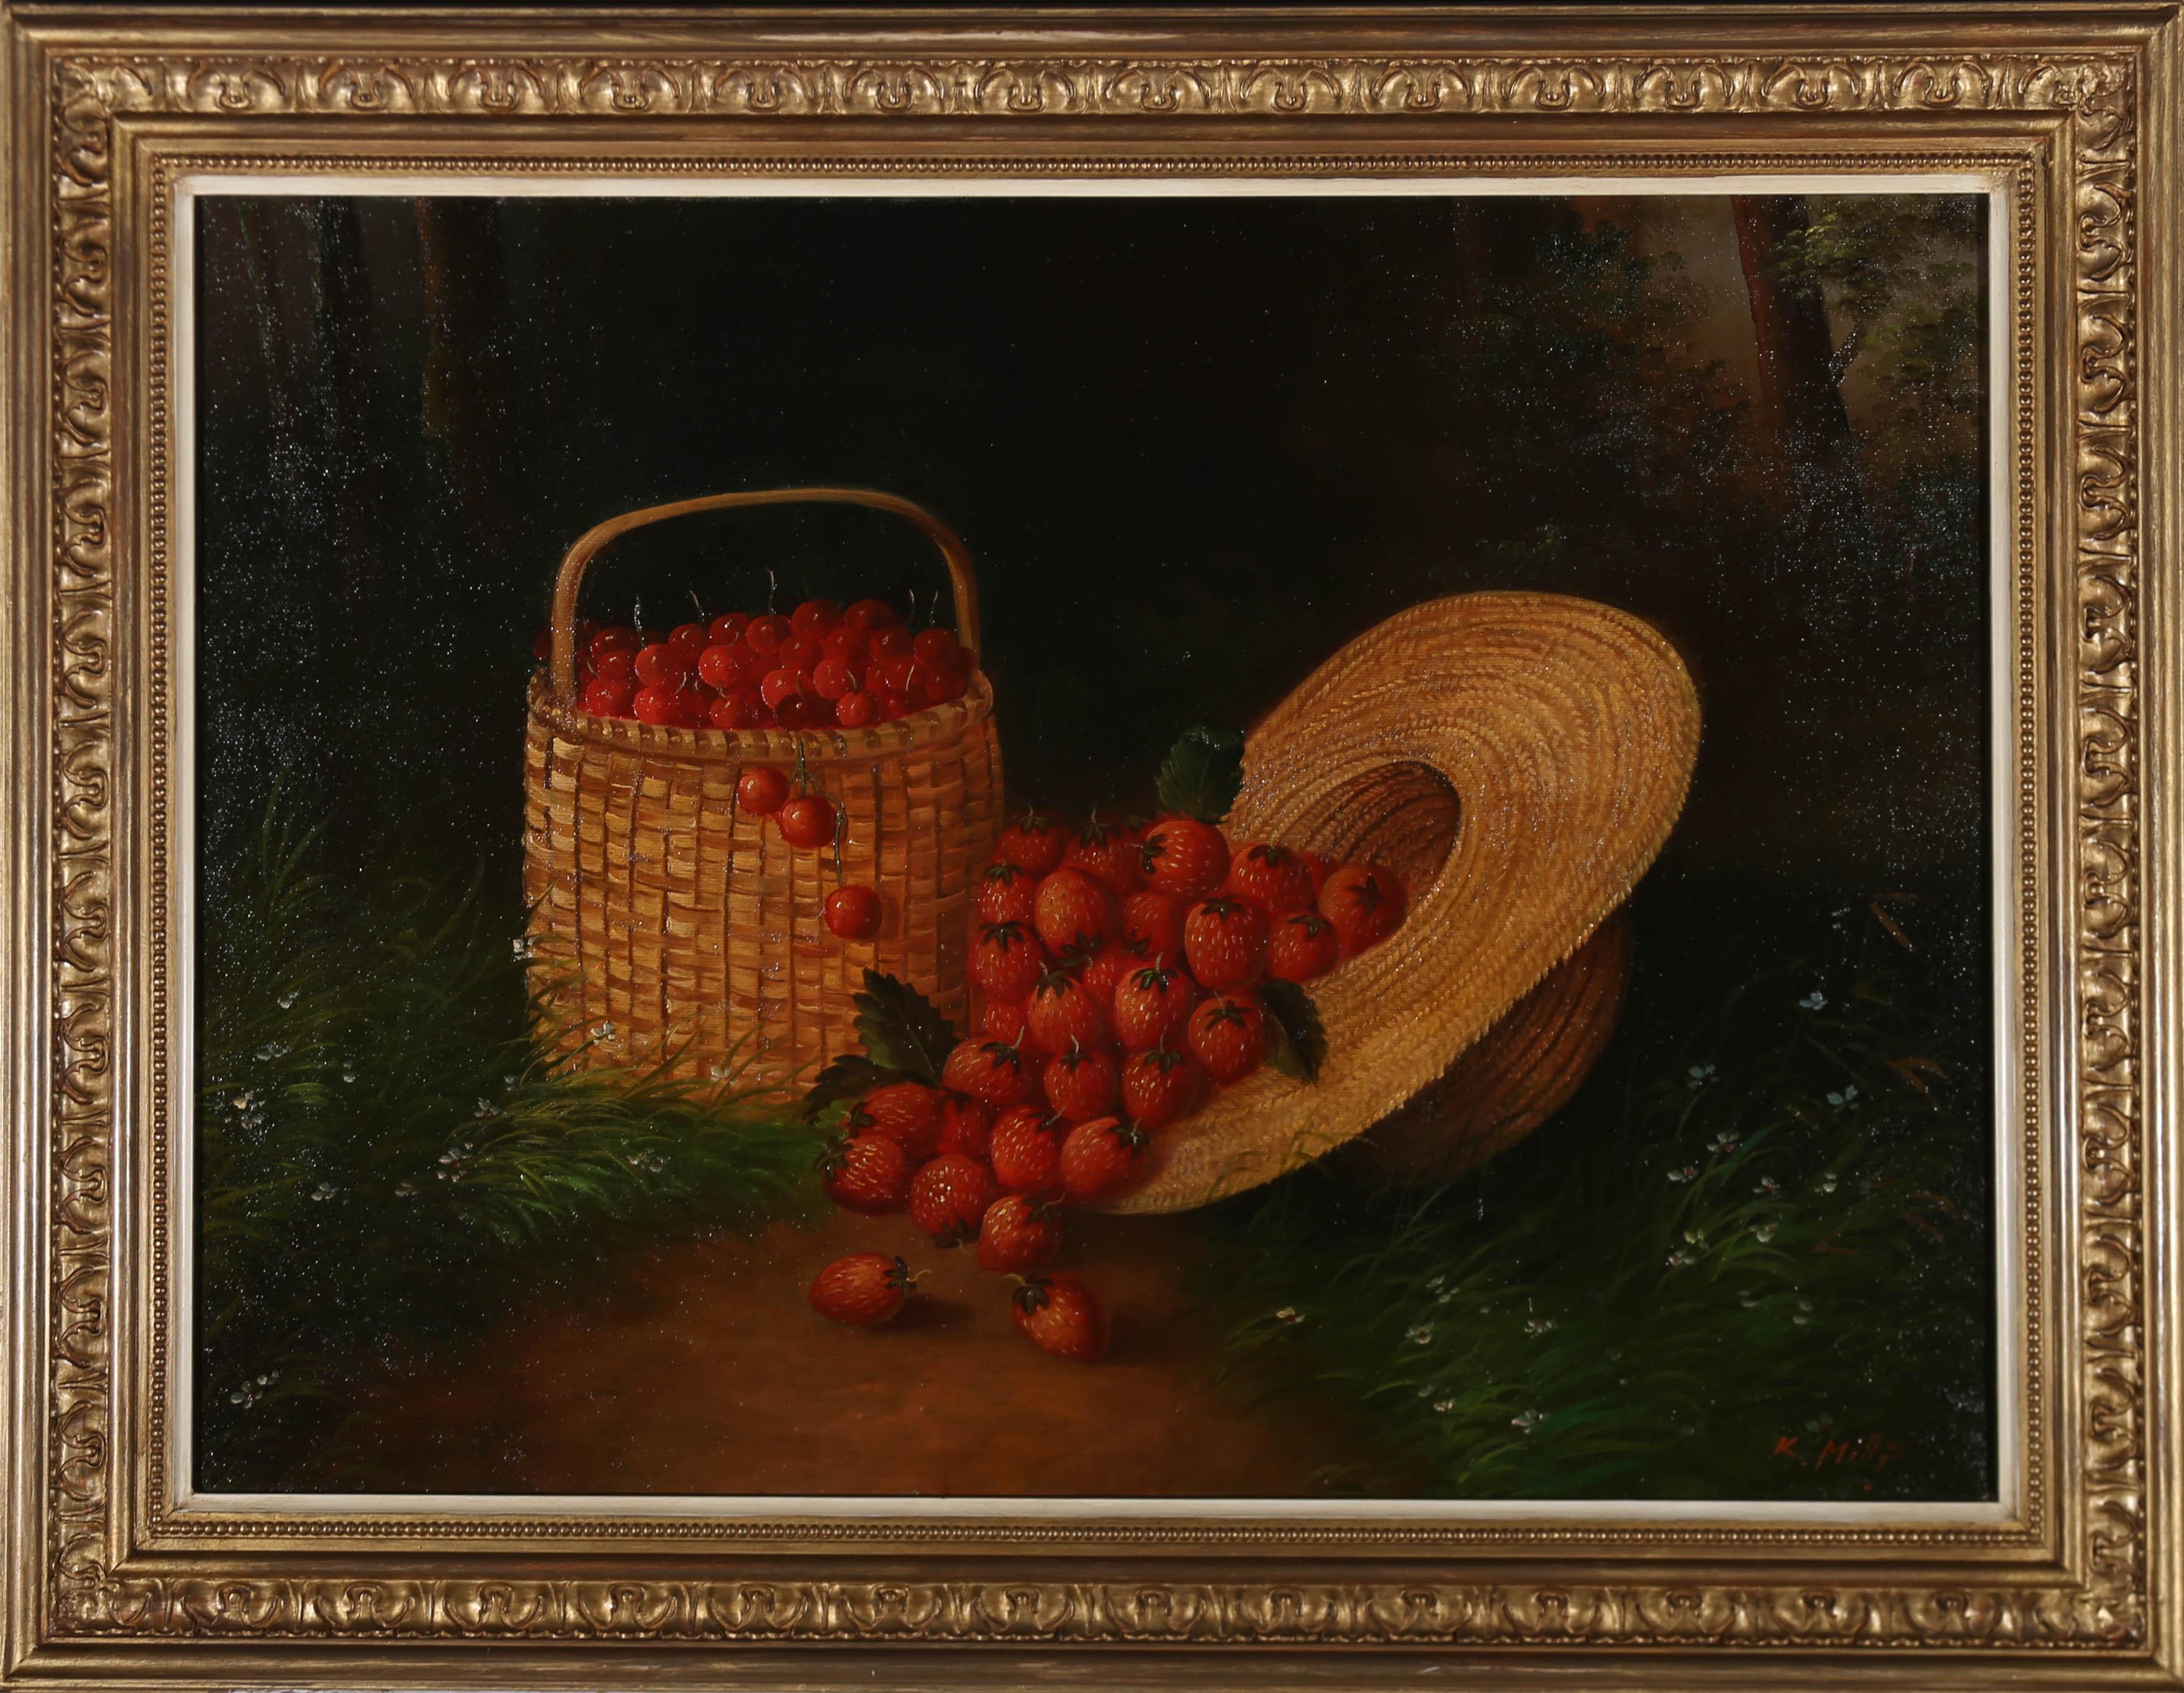 A charming study depicting a strawberries spilling frame a straw hat. Next to the hat a basket of ripe cherries sits in the forest grass. Signed to the lower right. Presented in a decorative gilt frame with foliate acanthus details and a beaded